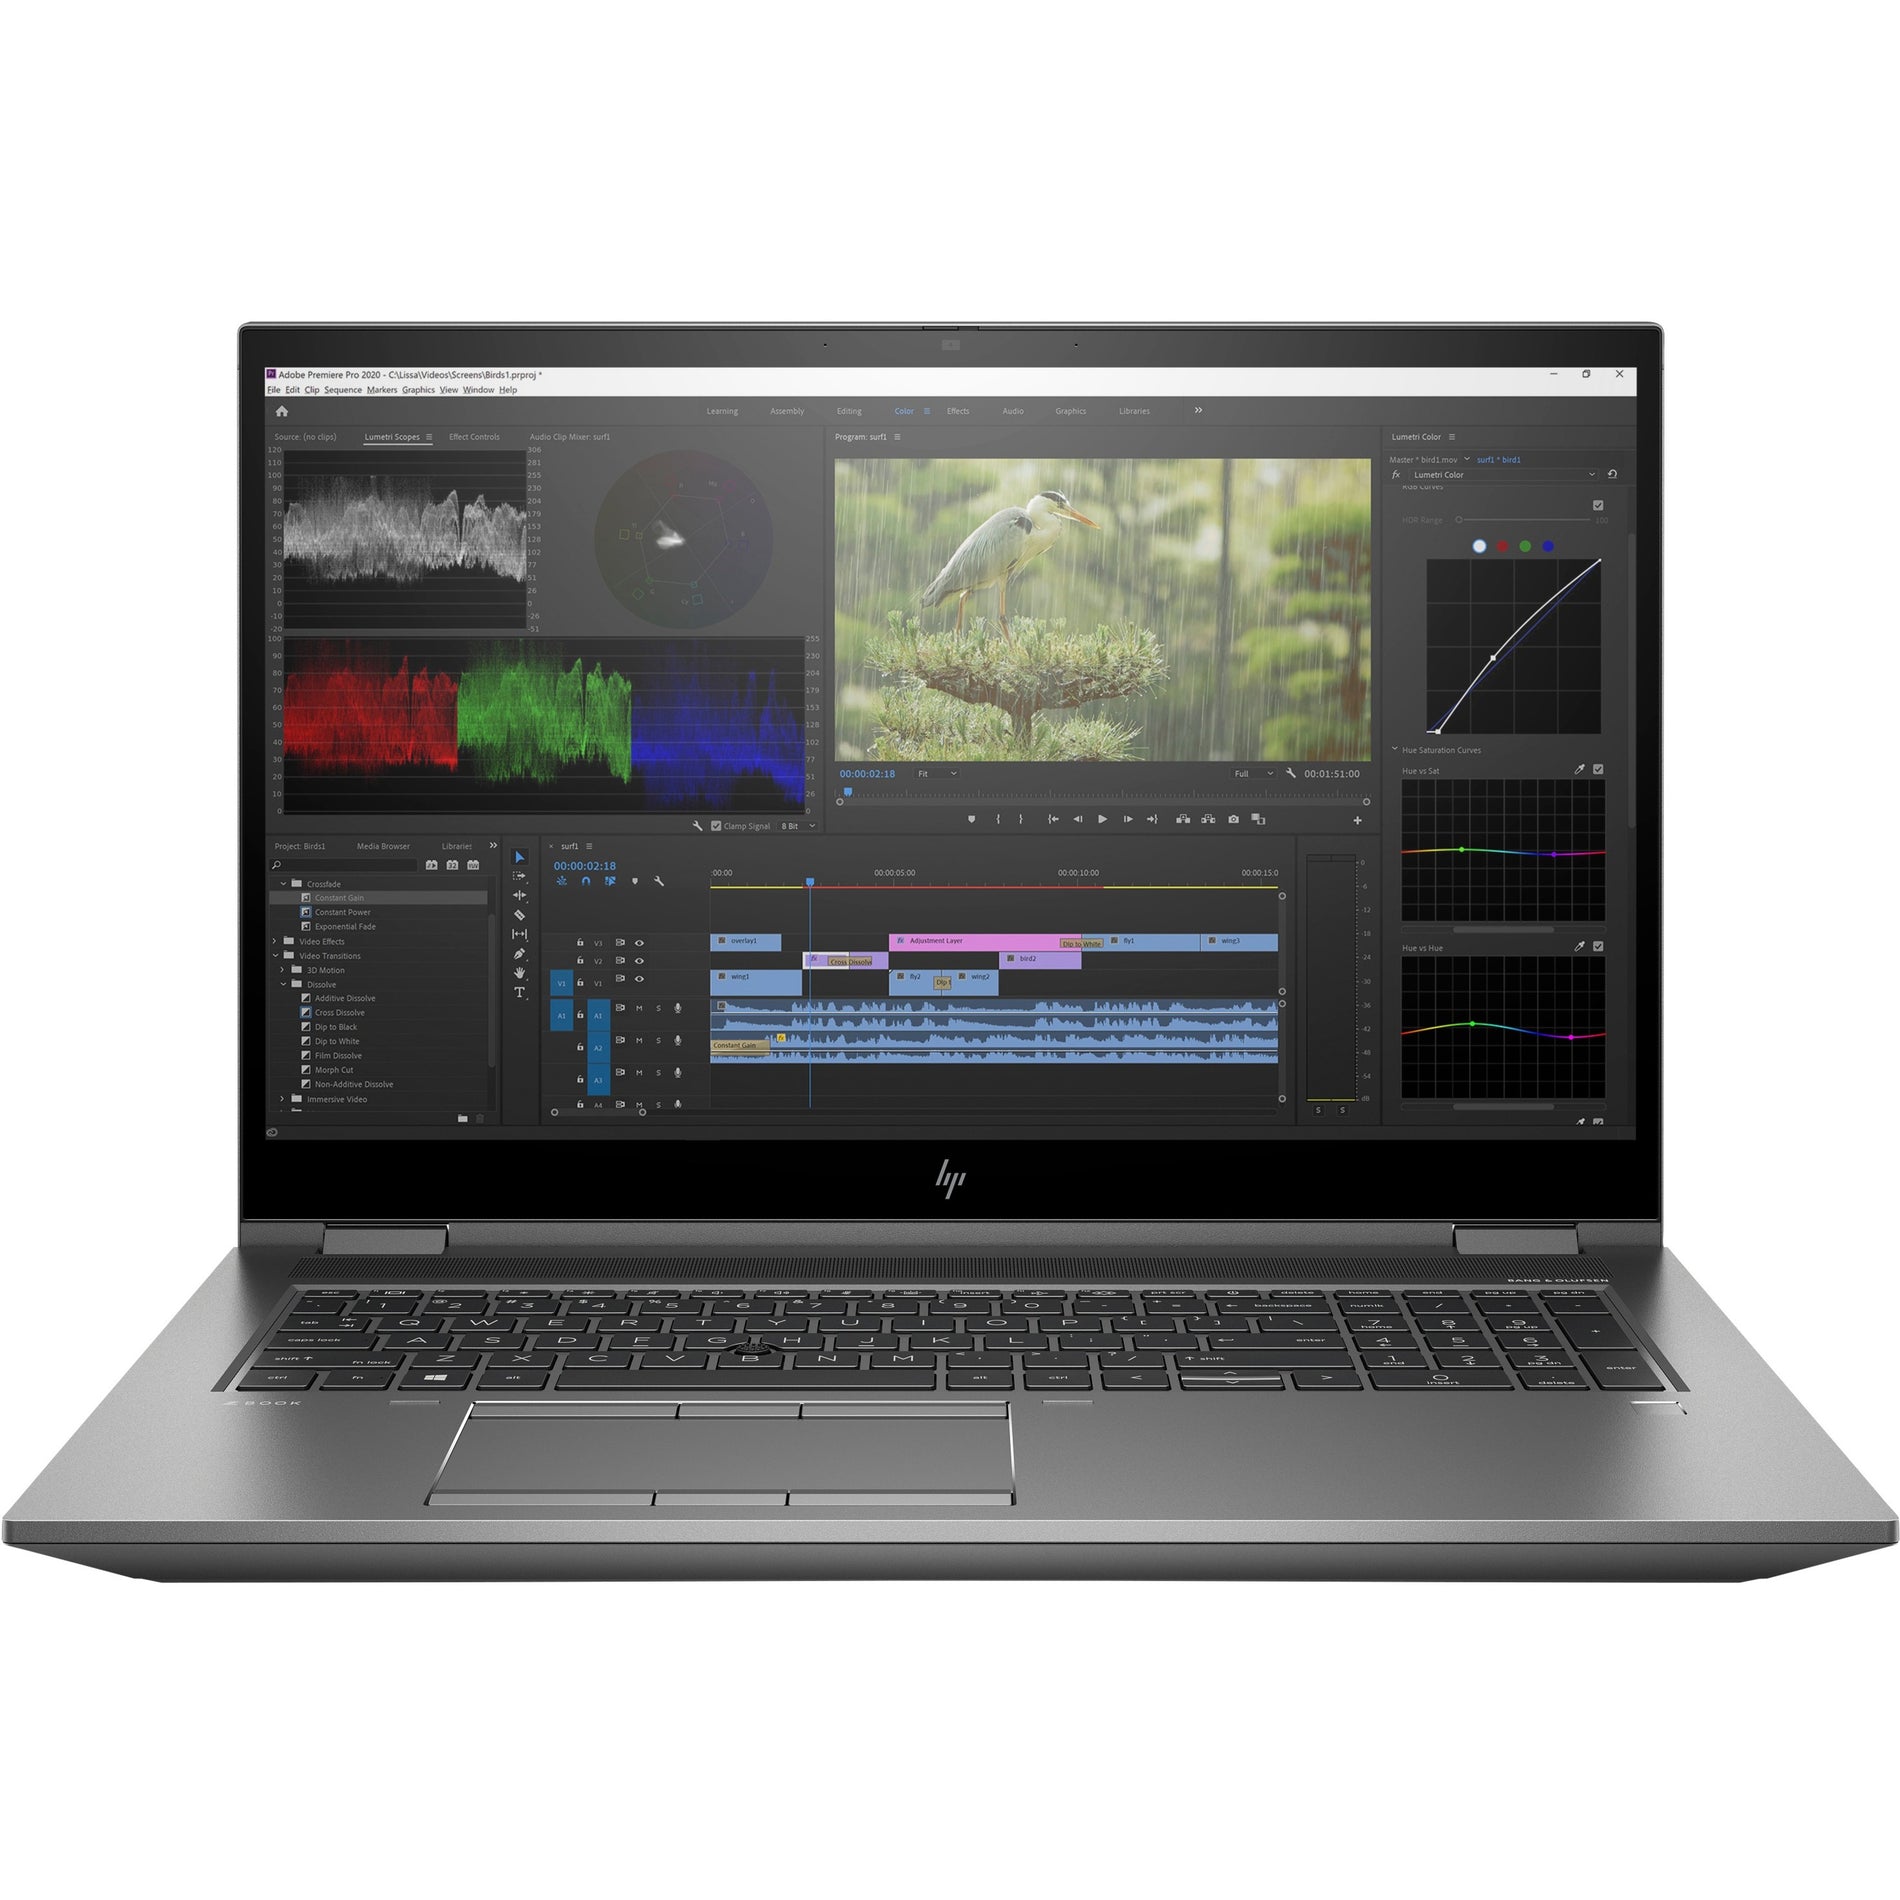 HP ZBook Fury 17 G8 17.3" Mobile Workstation - Full HD - 1920 x 1080 - Intel Core i9 11th Gen i9-11950H Octa-core (8 Core) 2.60 GHz - 32 GB Total RAM - 1 TB SSD (63H29UT#ABA) Front image